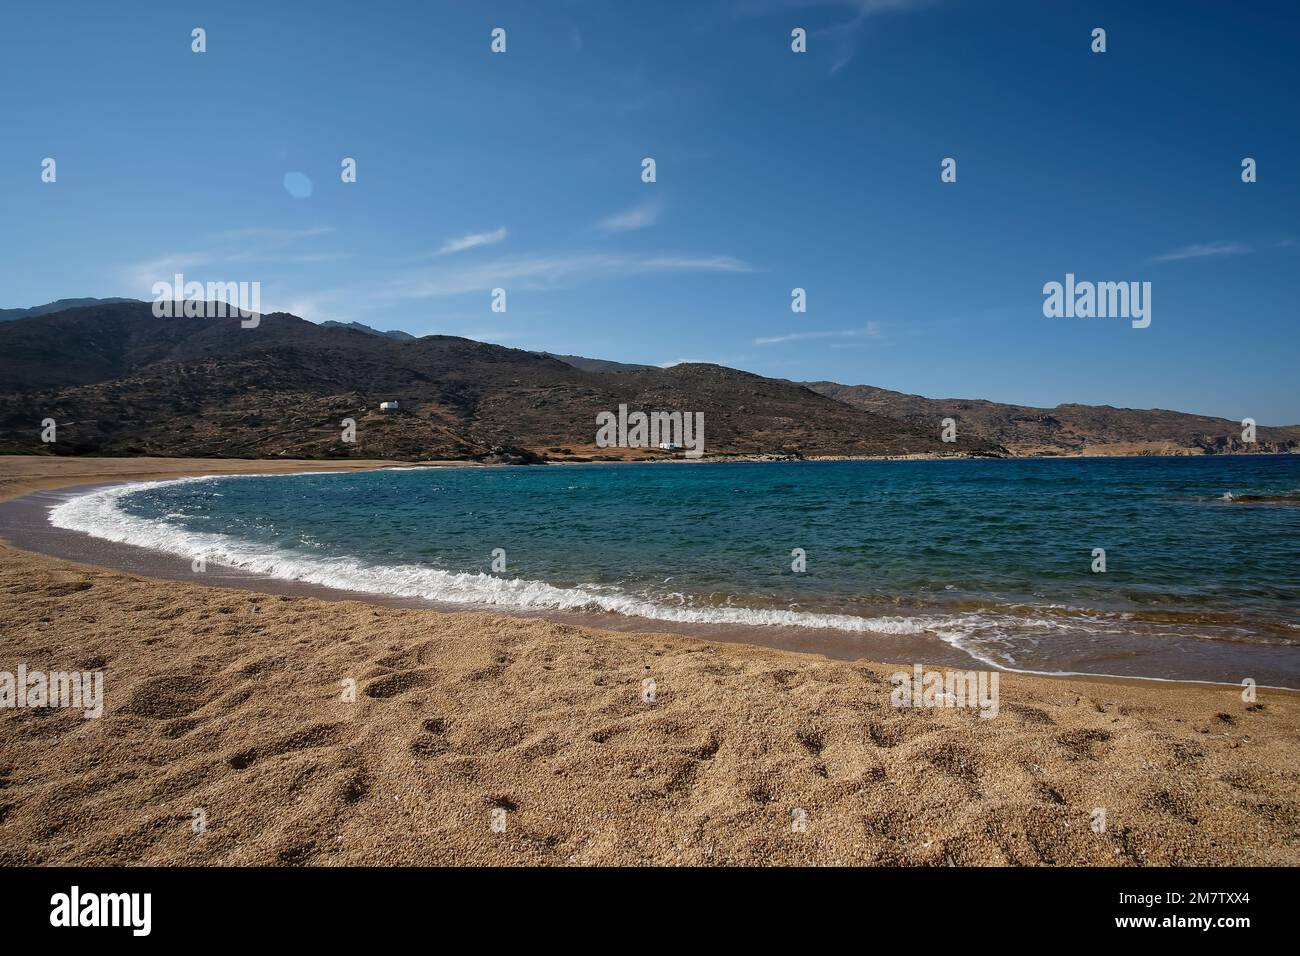 The amazing sandy and turquoise beach of Kalamos in Ios Cyclades Greece Stock Photo